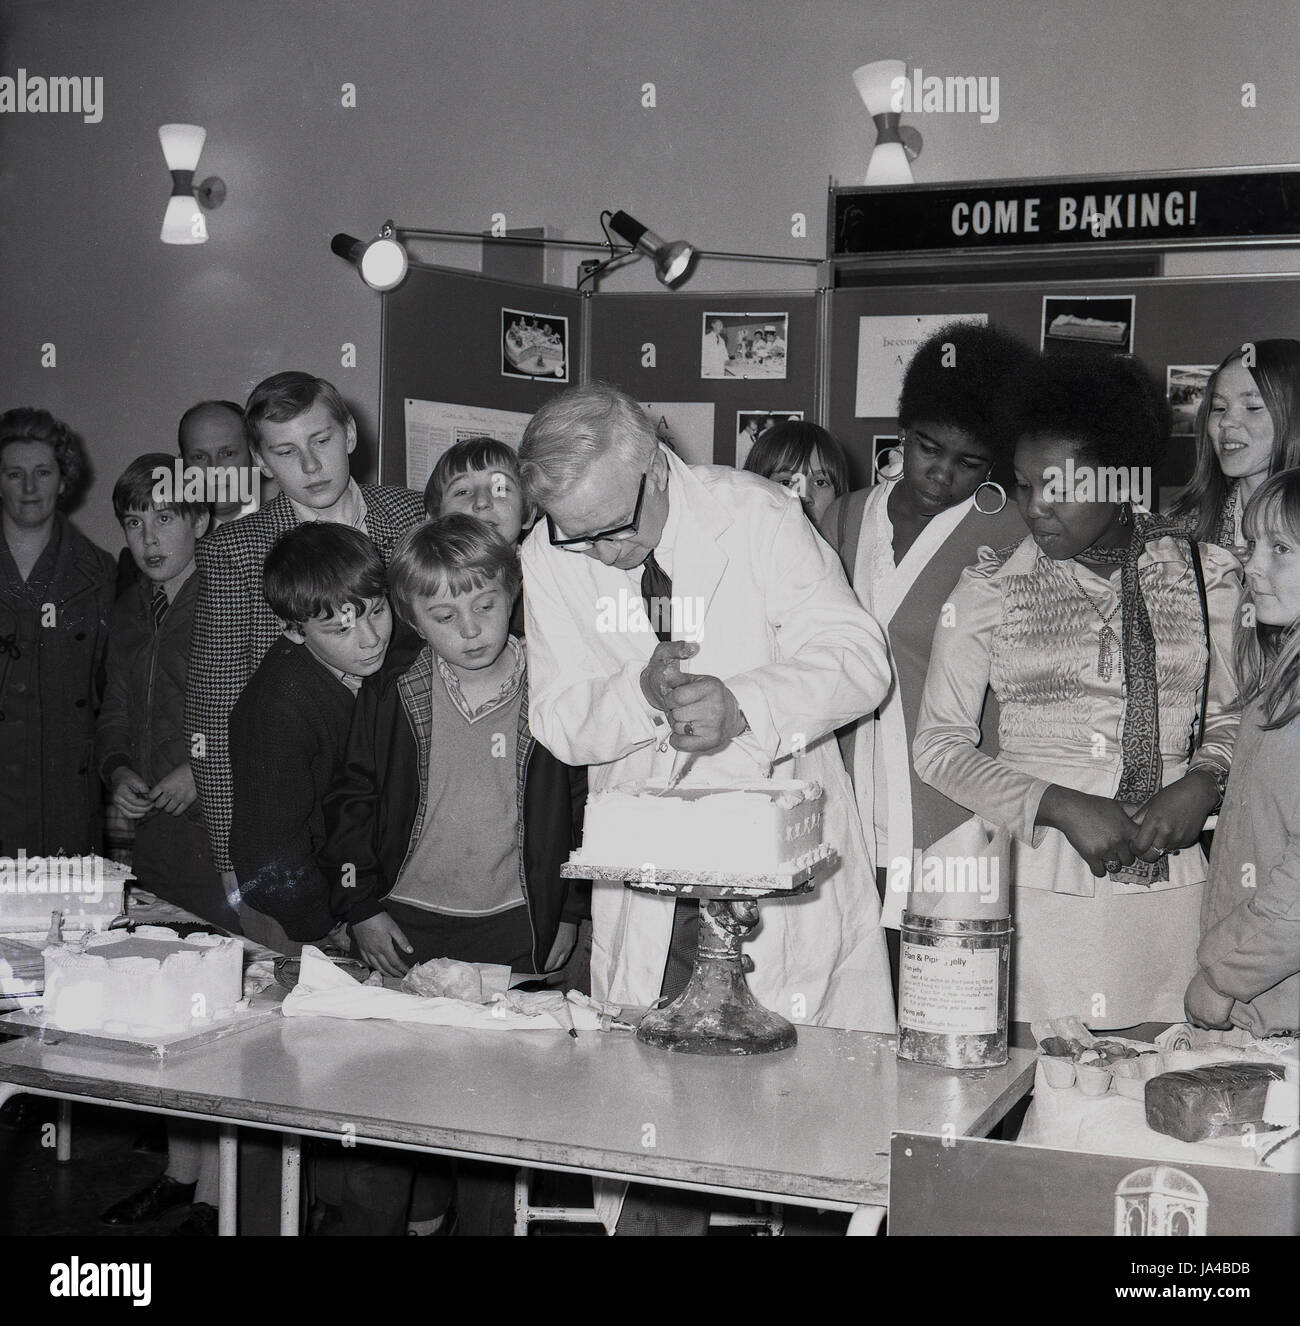 1960s, historical, come baking!.. a group of school pupils at a careers show, watch a man in a white coat icing a cake on a baking stand, South-east London, England, UK. In this era, both boys and girls attended classes in what was known as 'home economics', which covered areas such as foods, cooking and household budgeting. Stock Photo